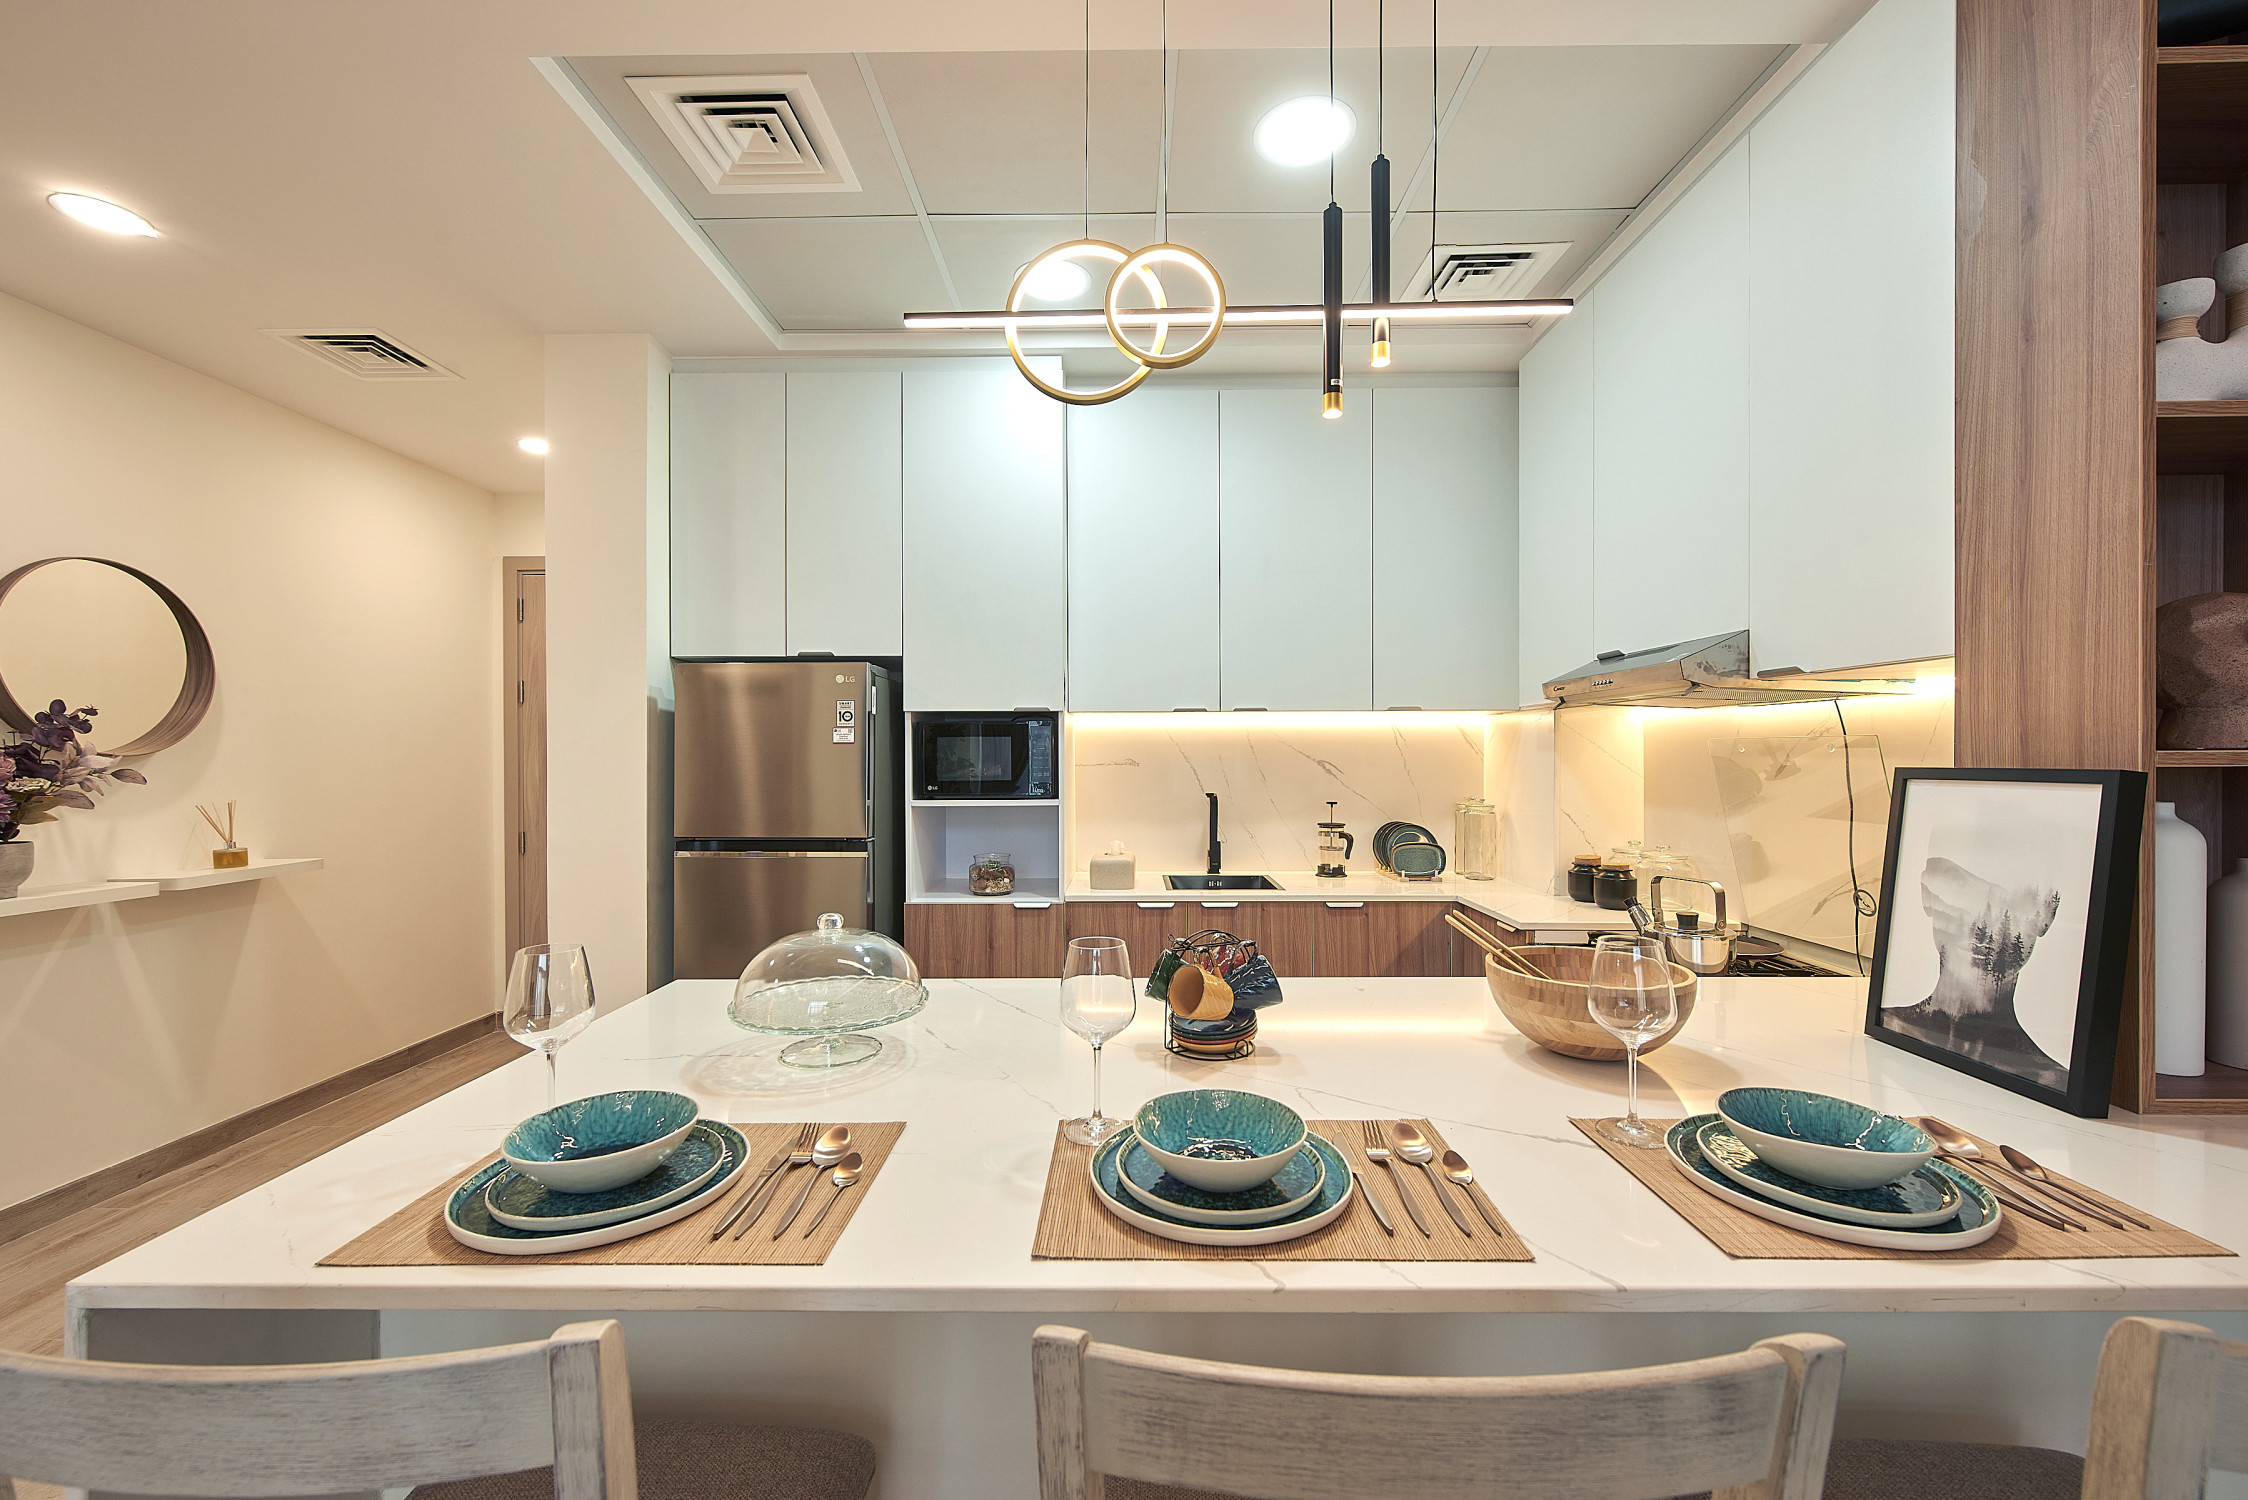 dining kitchen view 1 - Immobilier Dubai